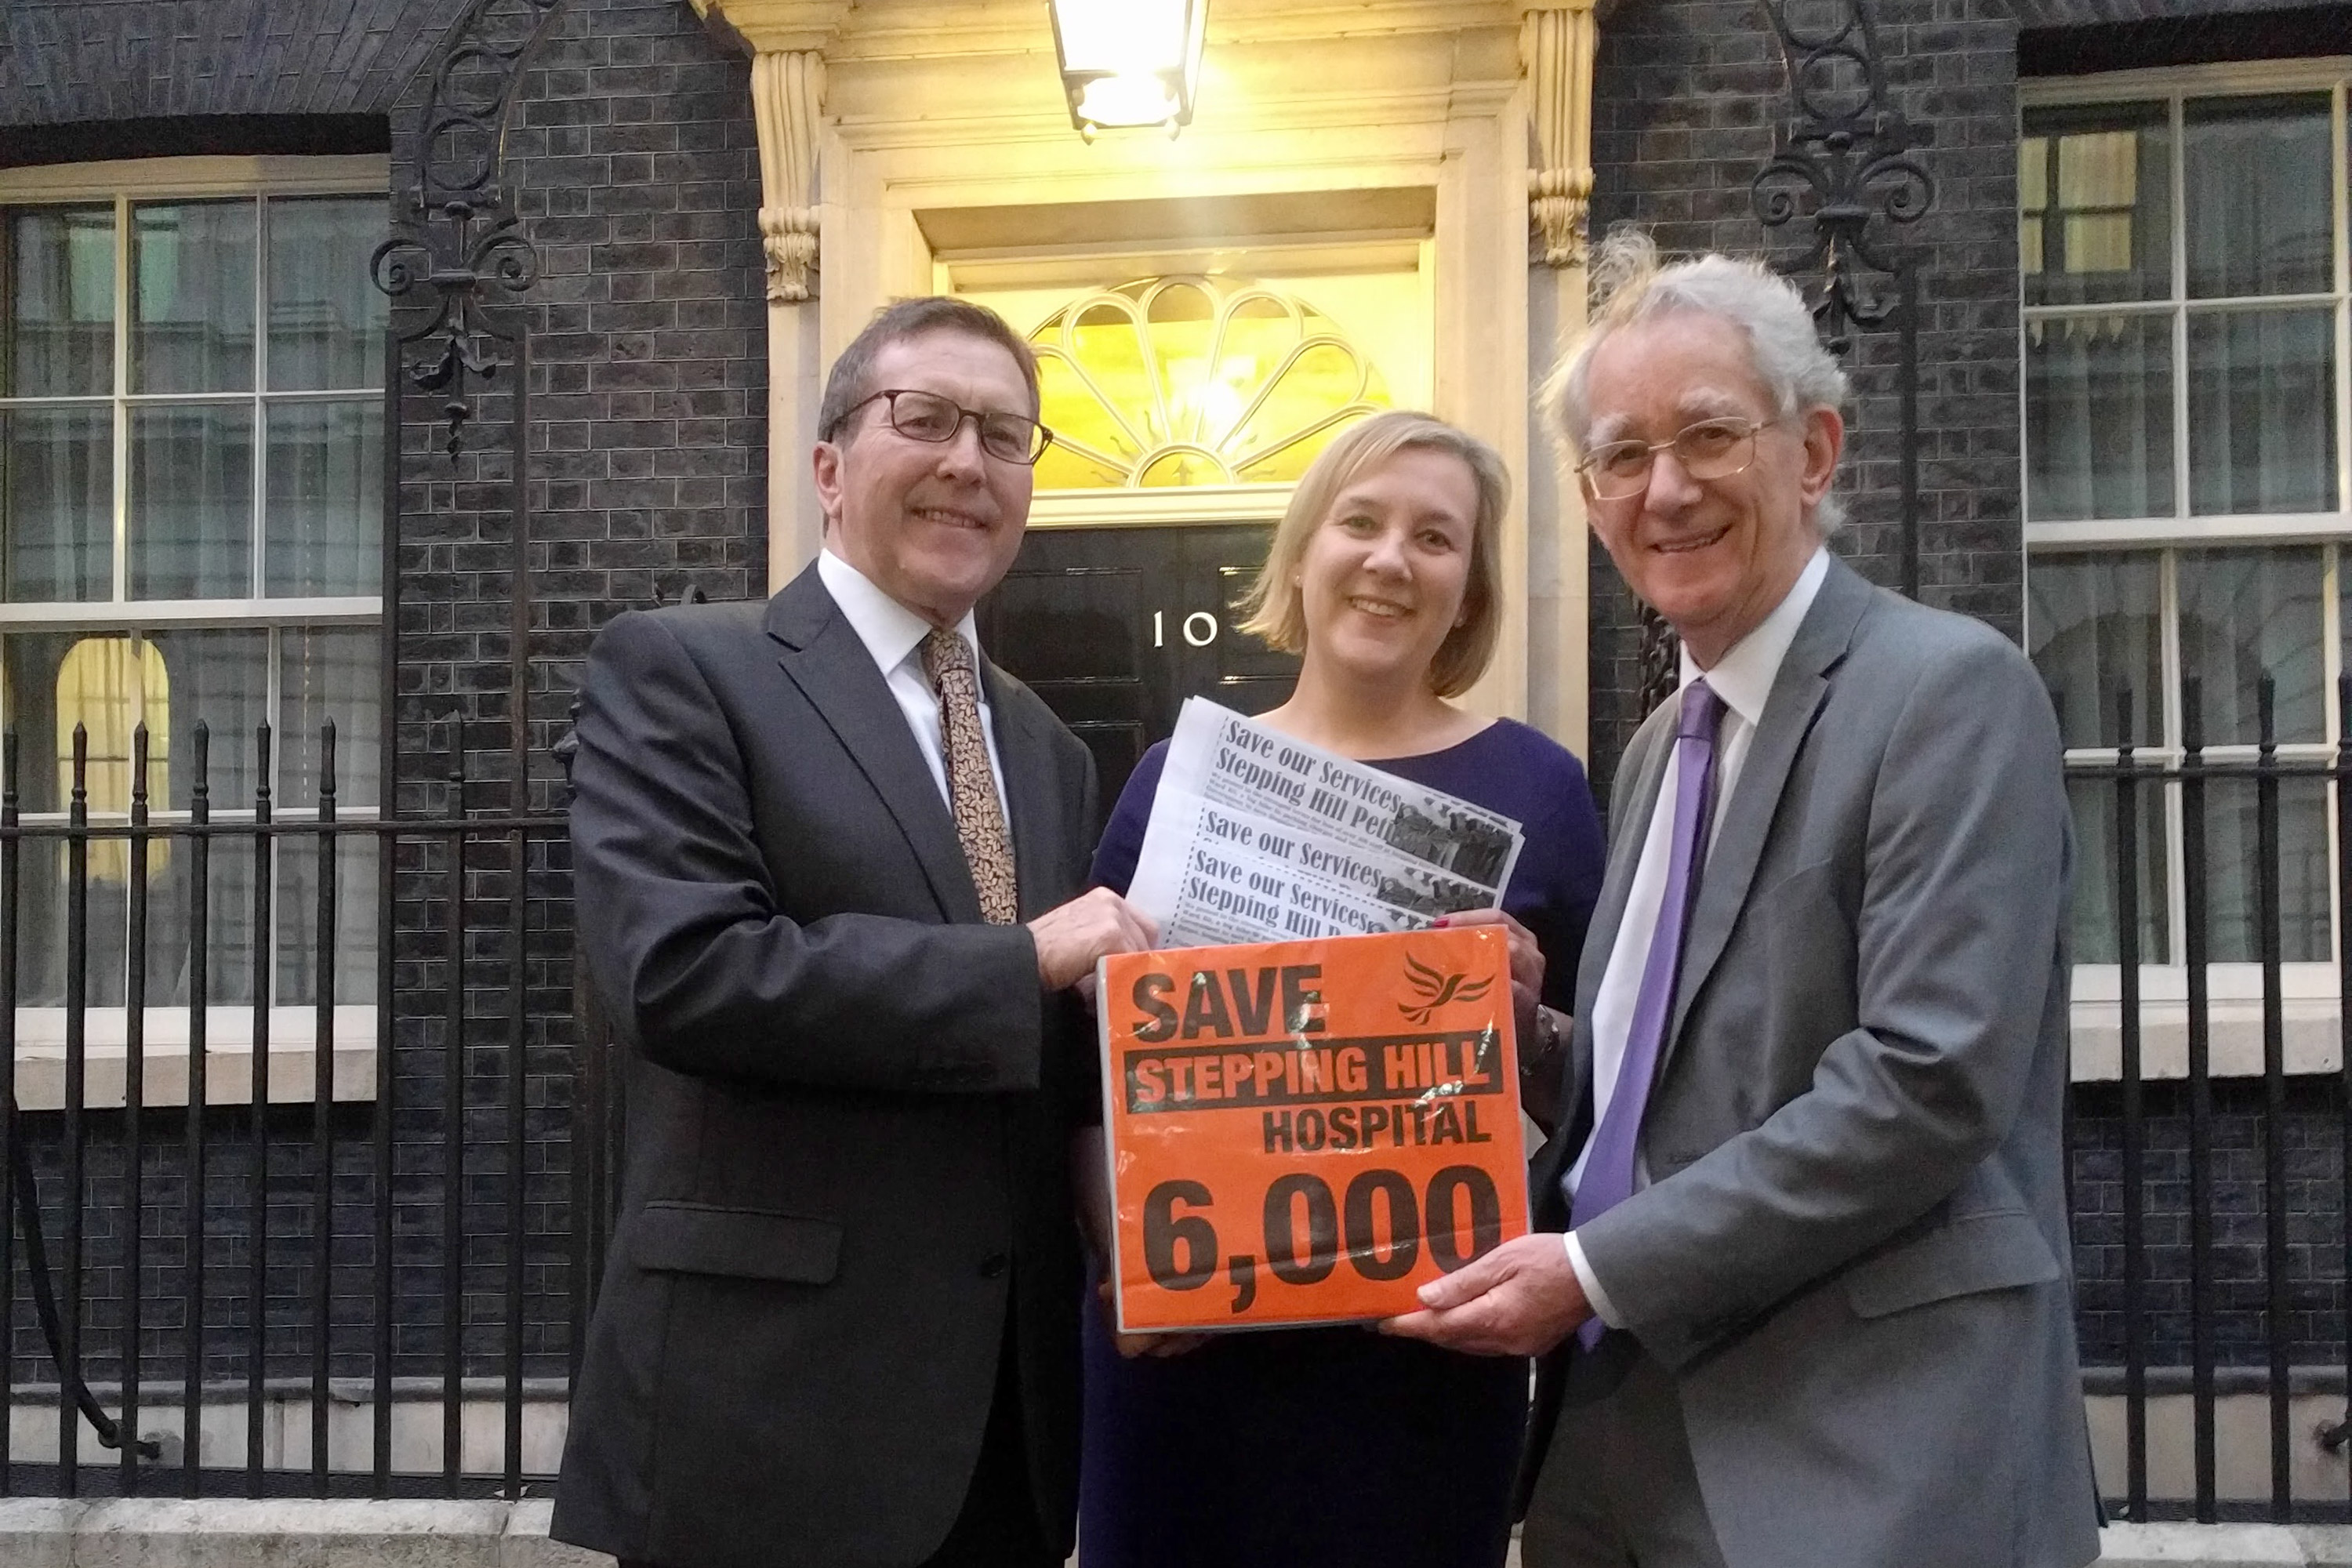 Mark Hunter, Lisa Smart and Andrew Stunell present the petition to Downing Street